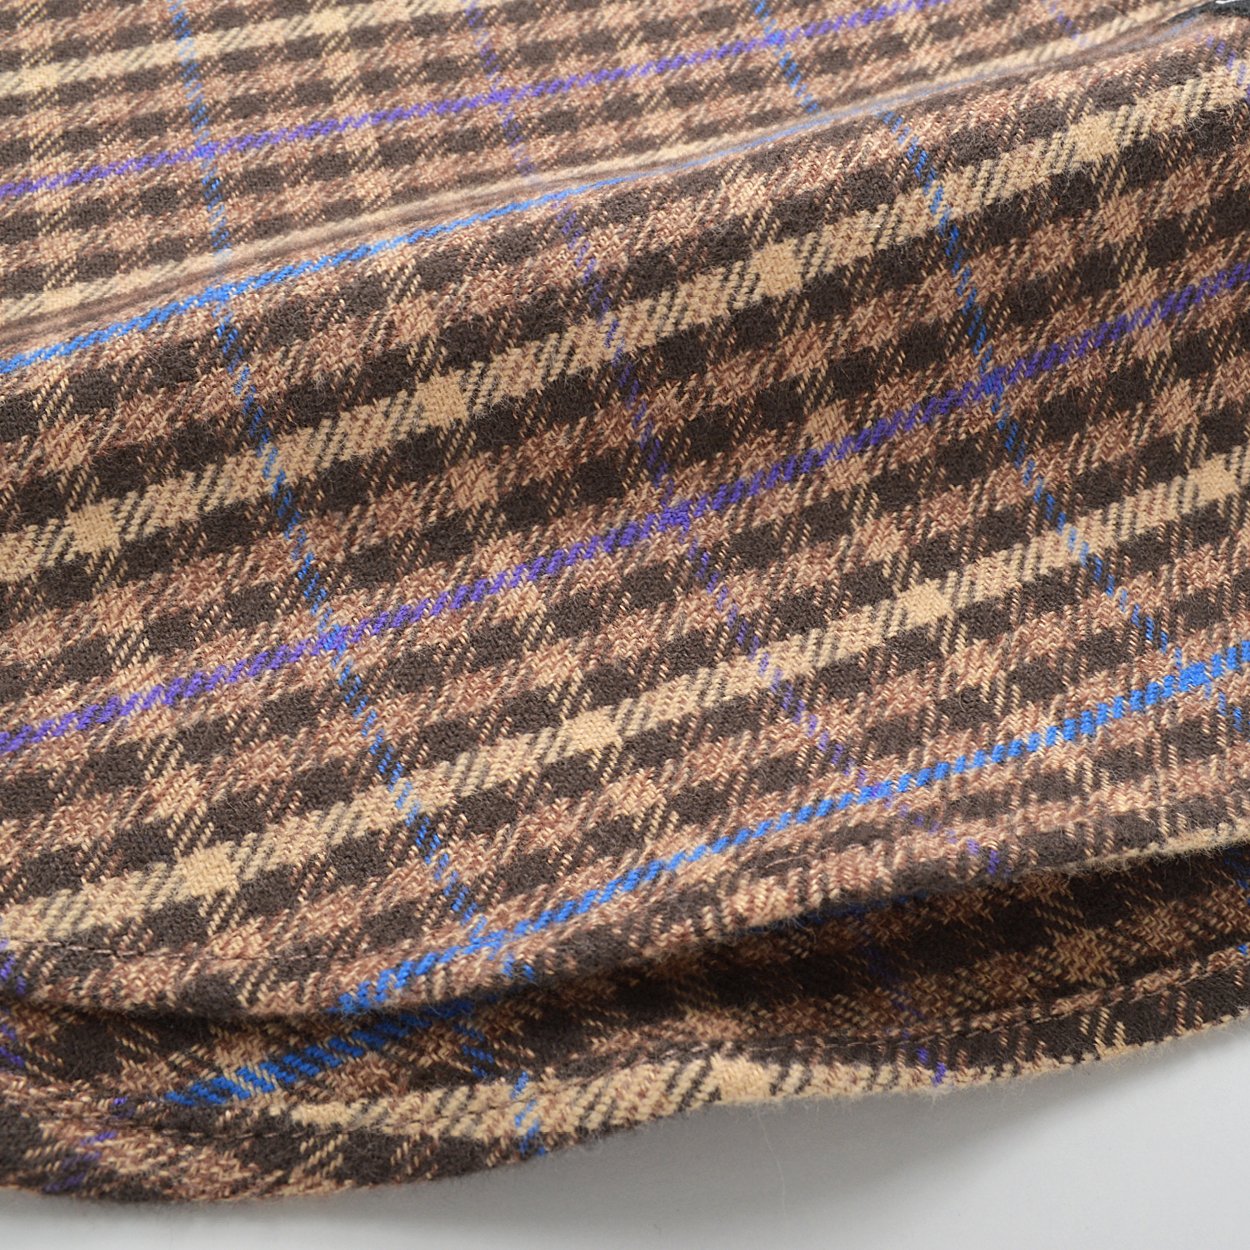 Brown Twill Check Flannel BROWN
Made in Canada OUTCLASS